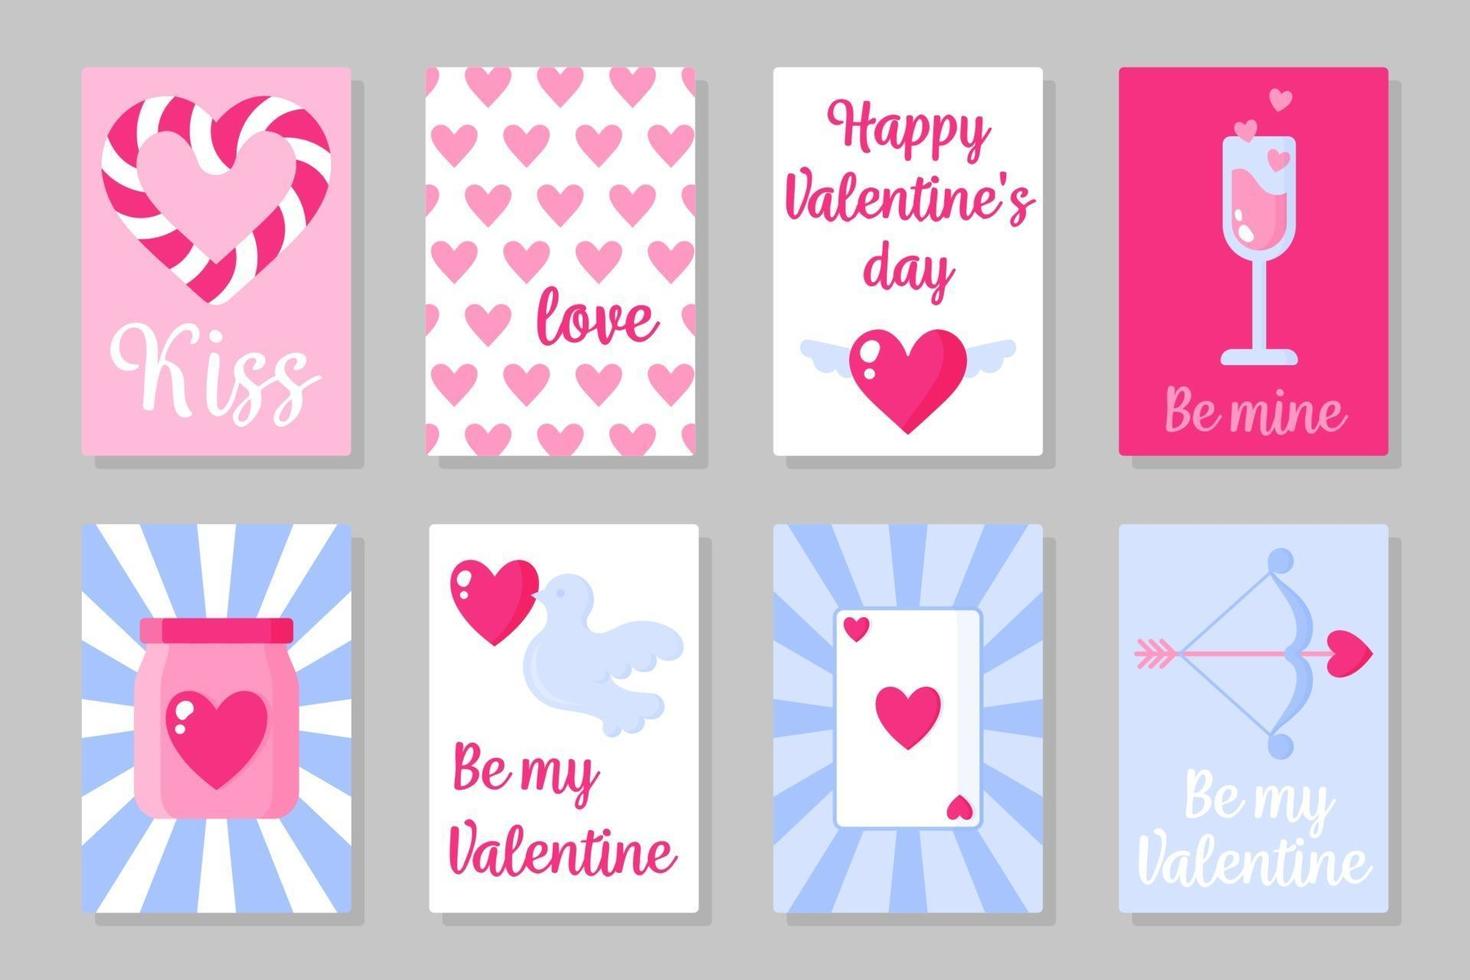 Set of pink, white and blue colored cards for Valentine's Day or wedding. Vector flat design isolated on gray background